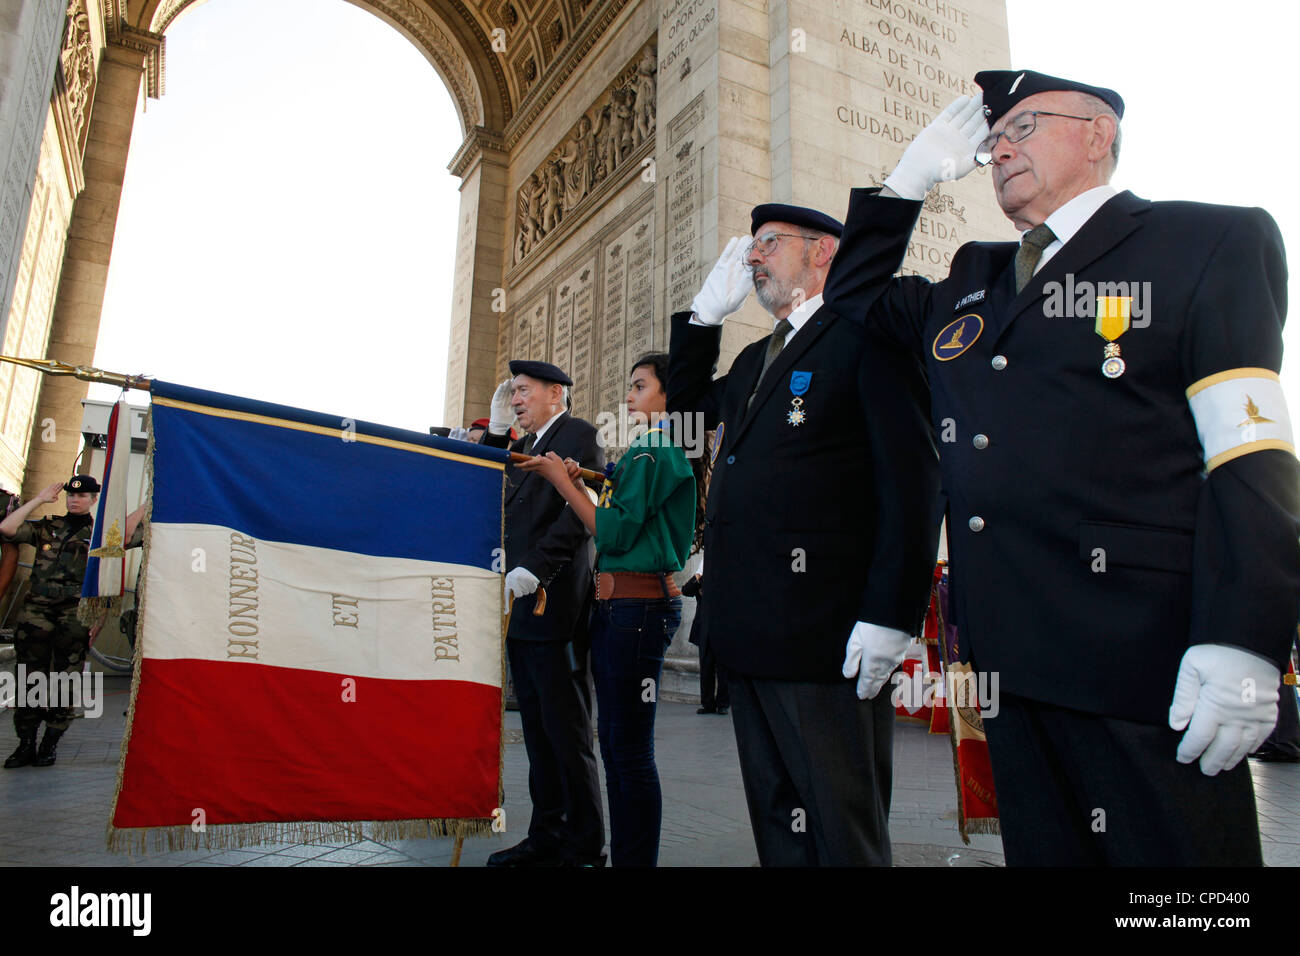 French Muslim girl scout and war veterans at the Arc de Triomphe, Paris, France, Europe Stock Photo